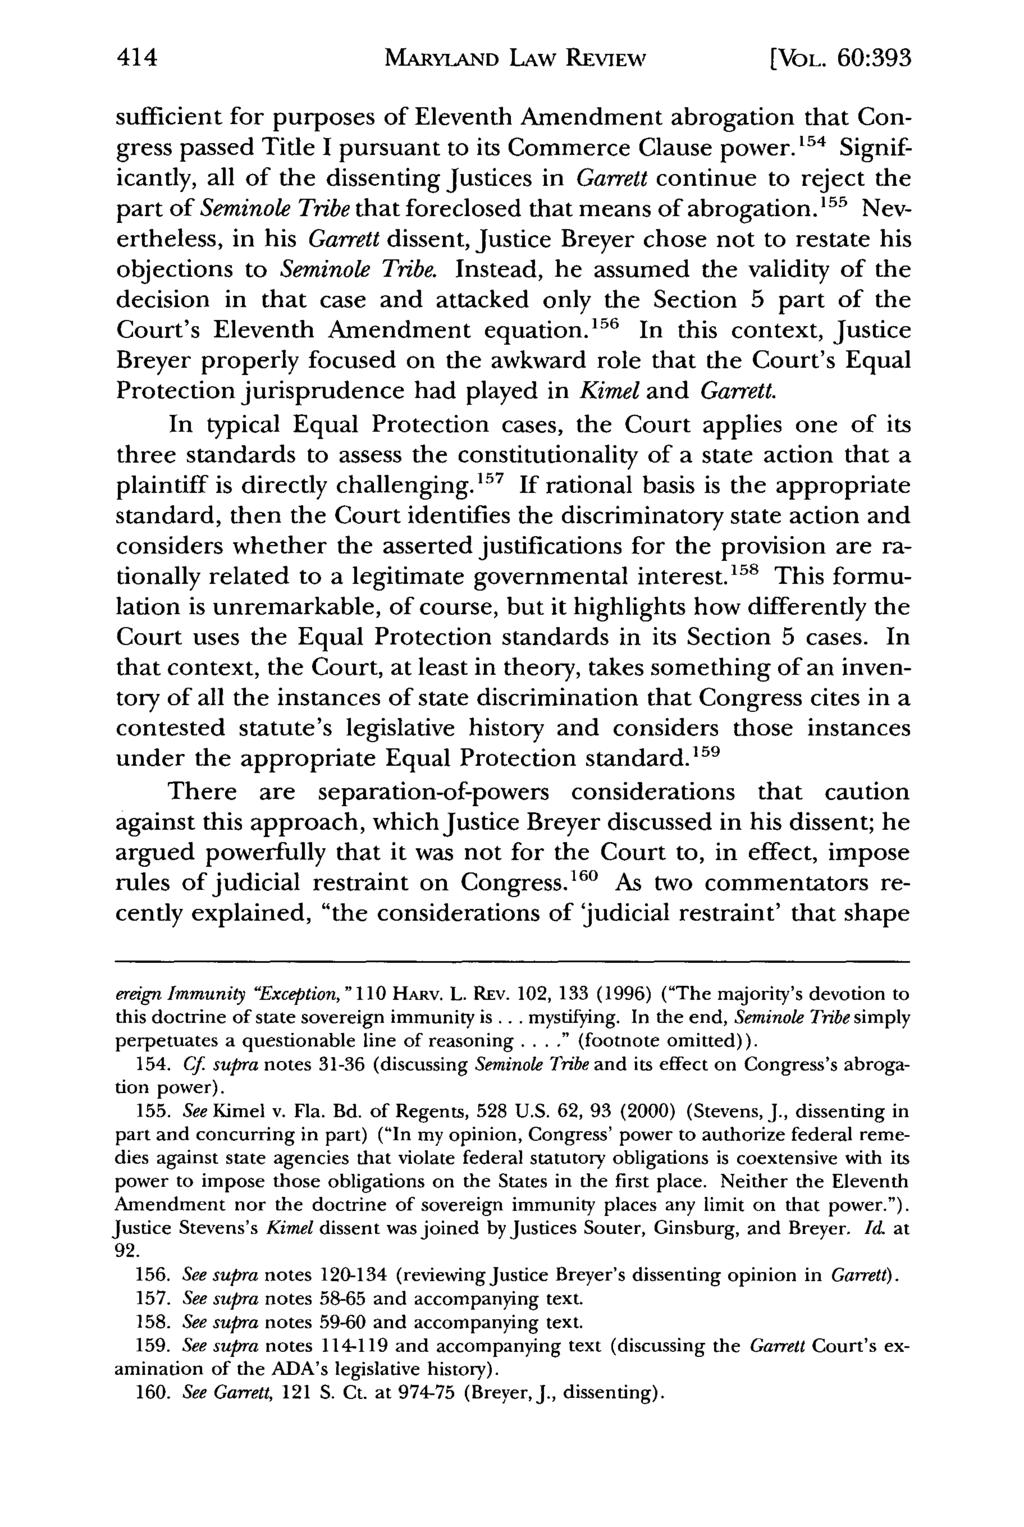 MARYLAND LAW REVIEW[L [VOL. 60:393 sufficient for purposes of Eleventh Amendment abrogation that Congress passed Title I pursuant to its Commerce Clause power.